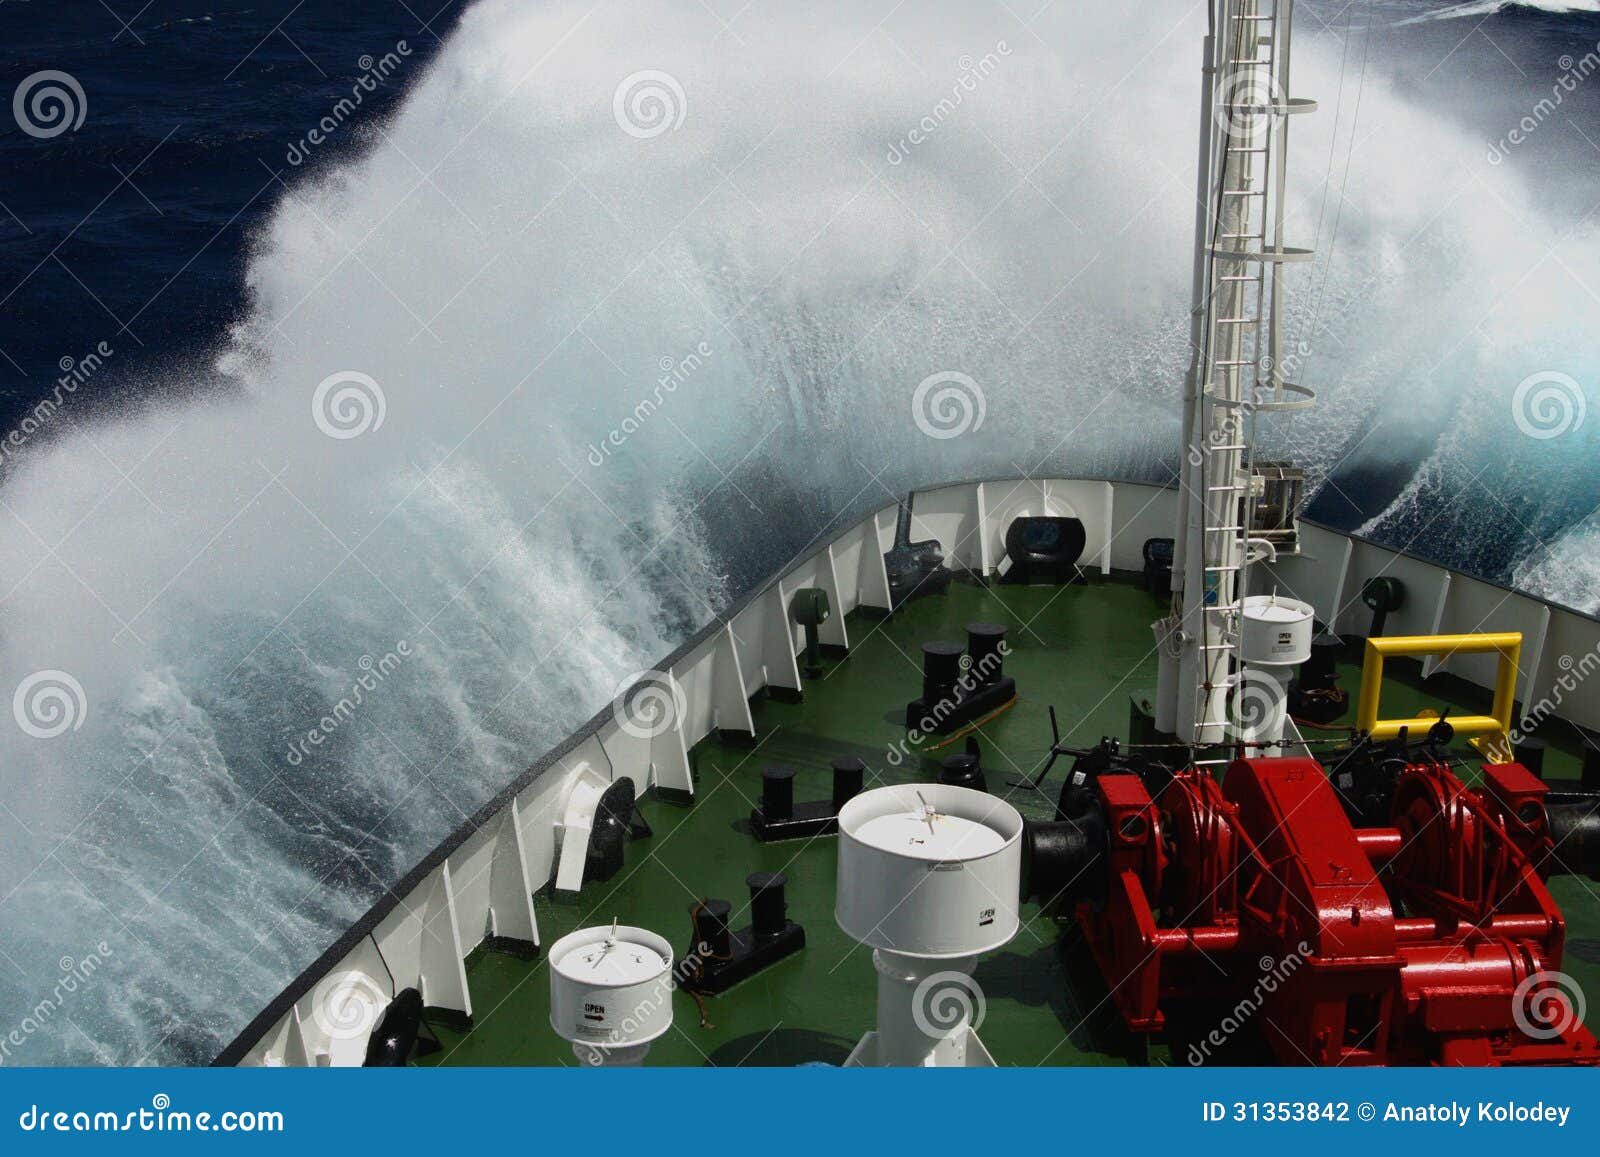 big wave rolling over the snout of the ship